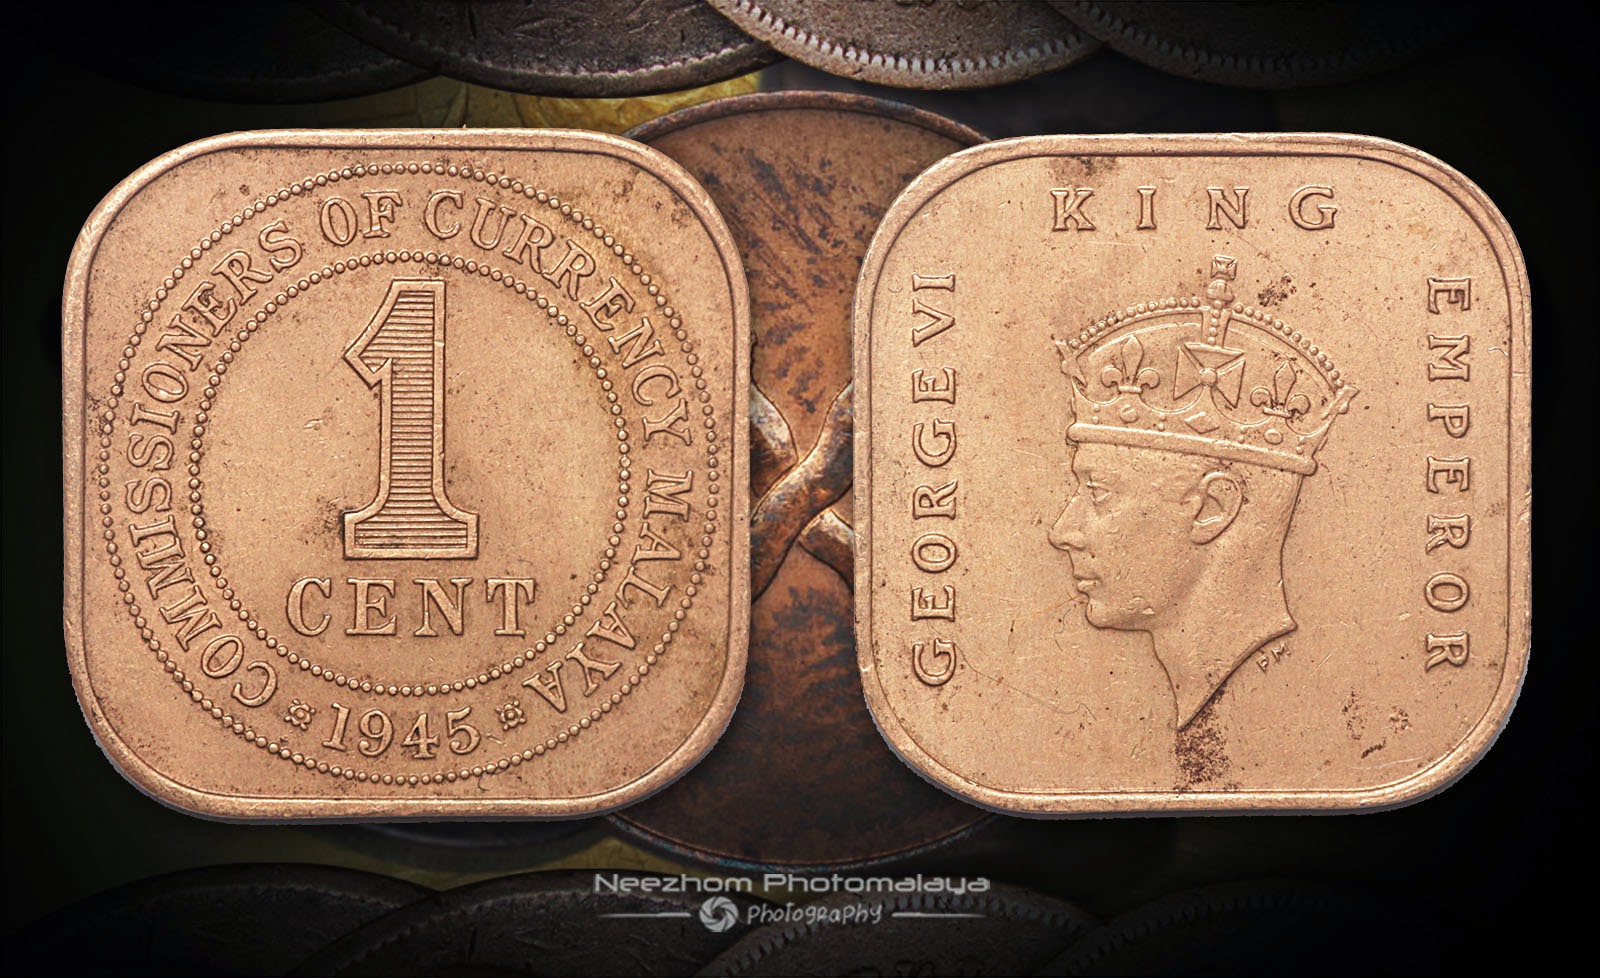 Commisioners of Currency Malaya coin 1 Cent 1945